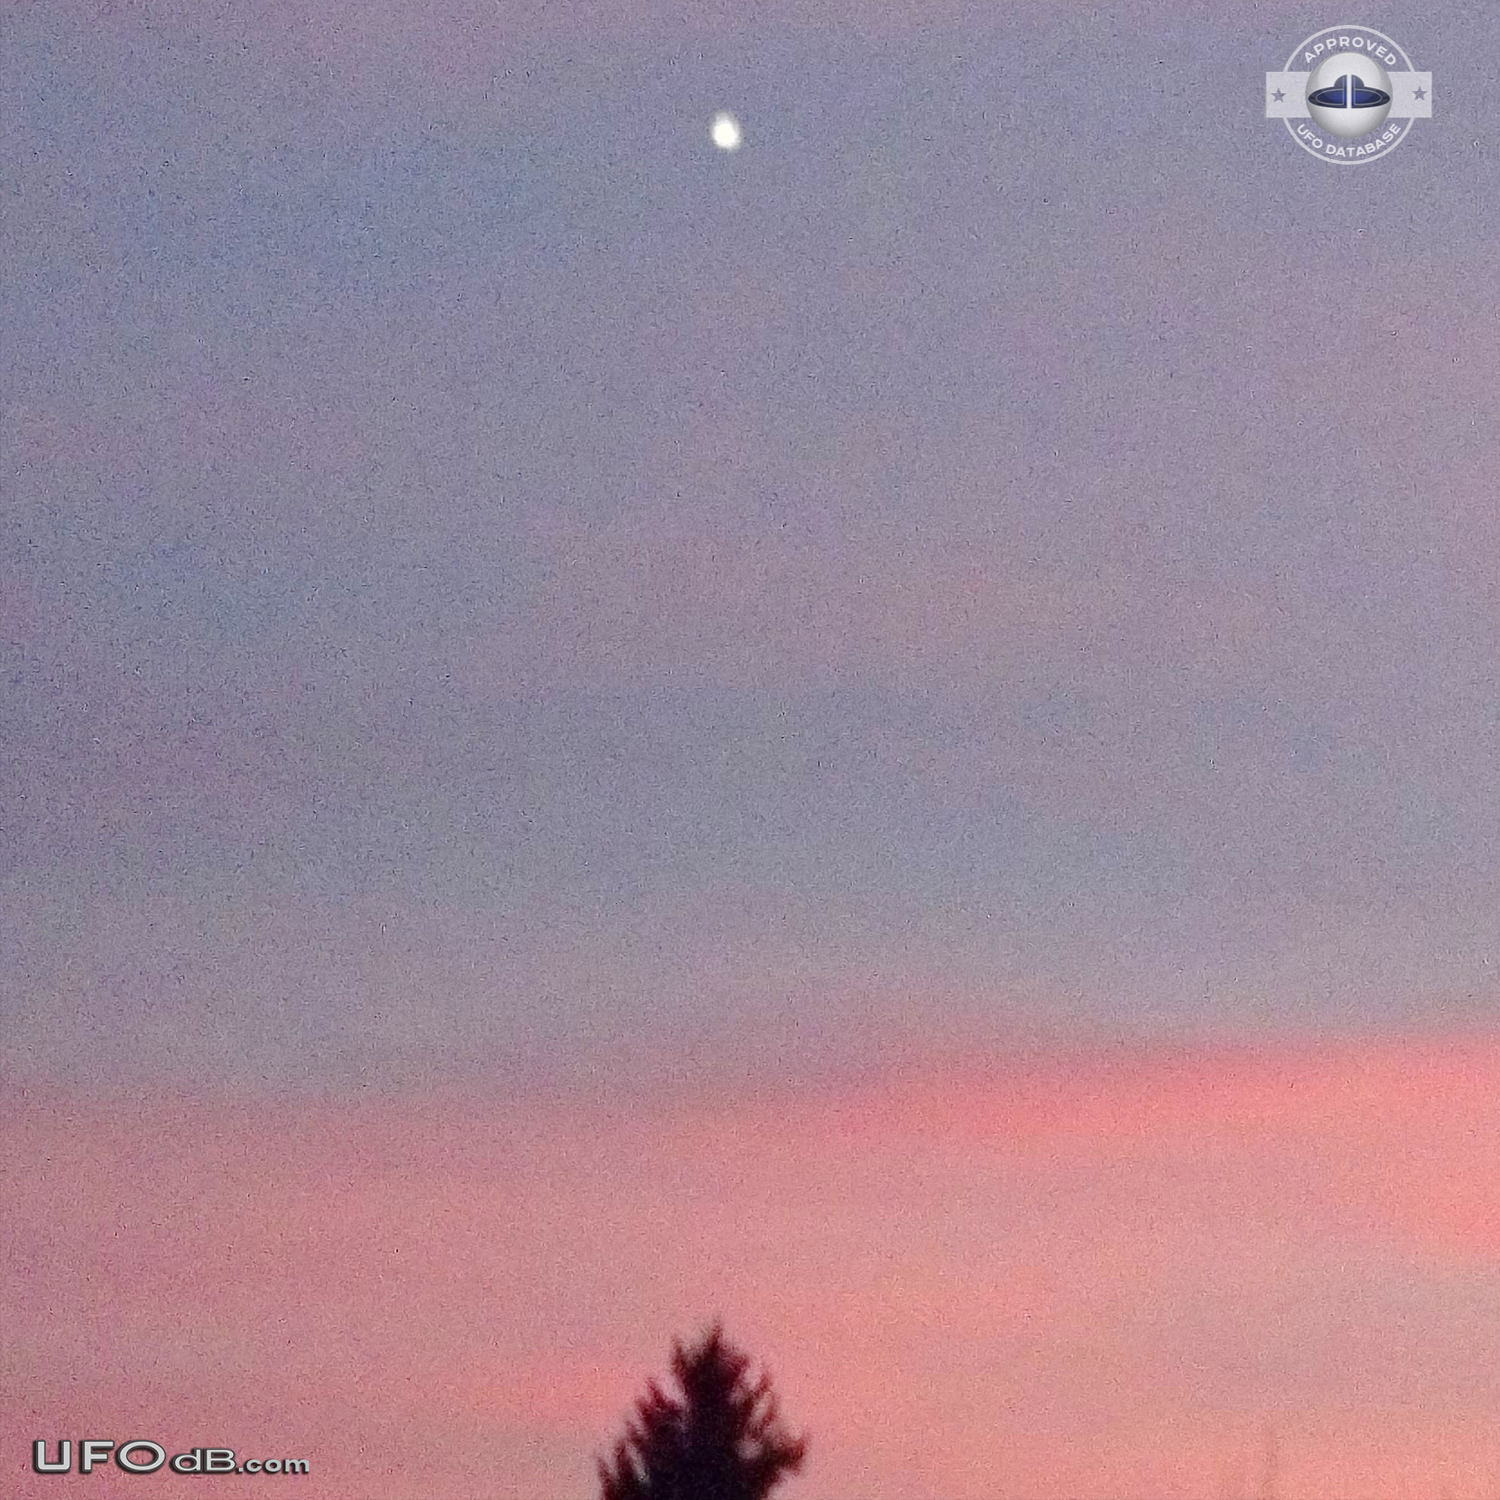 White fluffy Orb UFO caught on photo in the sky of Butte, Montana 2012 UFO Picture #517-1